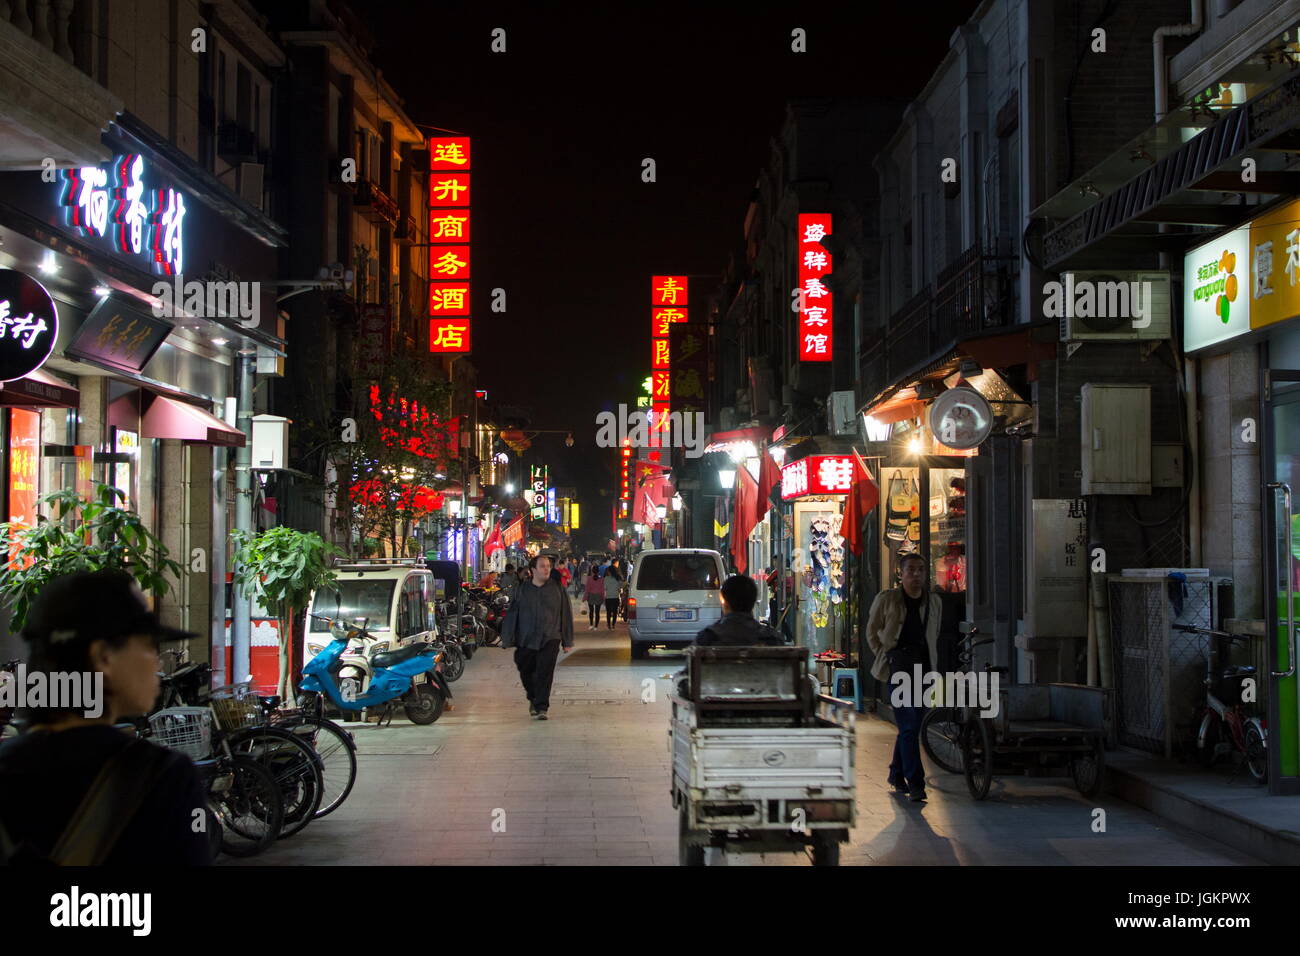 BEIJING, CHINA - SEPTEMBER 29: Hutong street night view with people walking. Beijing city center area Stock Photo